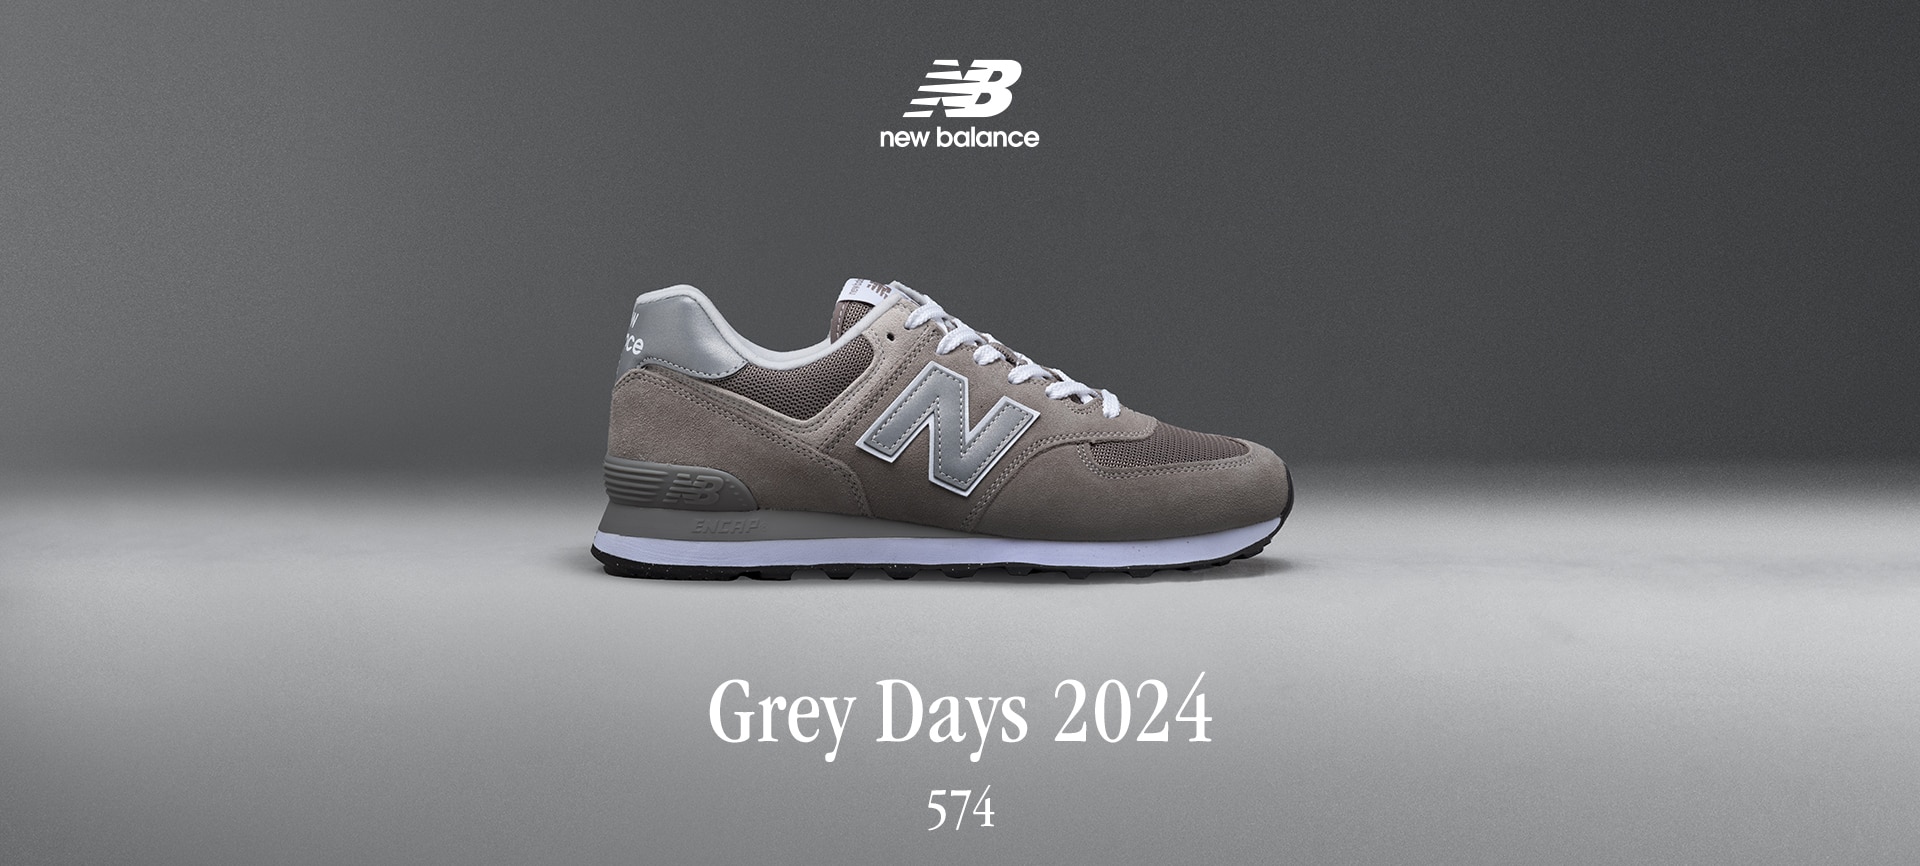 As part of the two-week celebration of New Balance’s signature color, we’re introducing ‘Grey Days’ – a collection of your favourite styles.